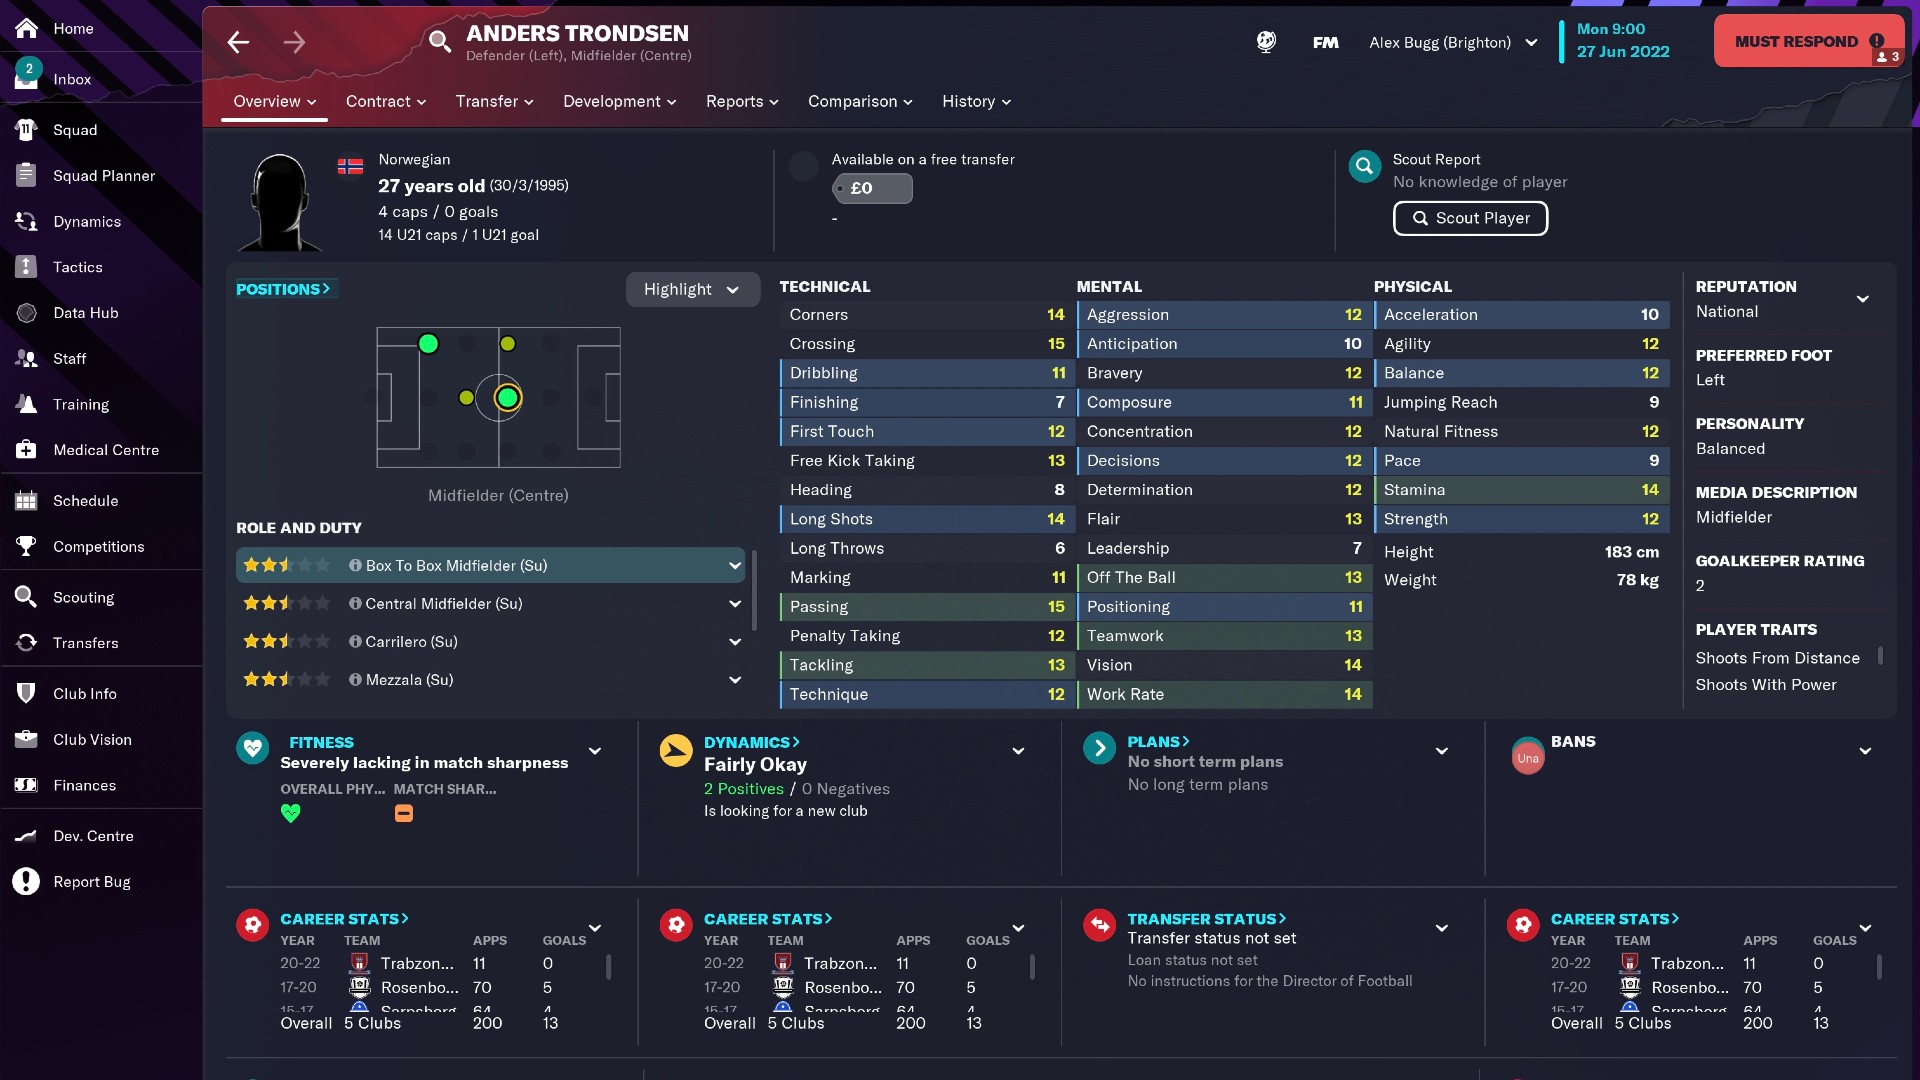 The best FM23 free agents to sign in Football Manager 2023